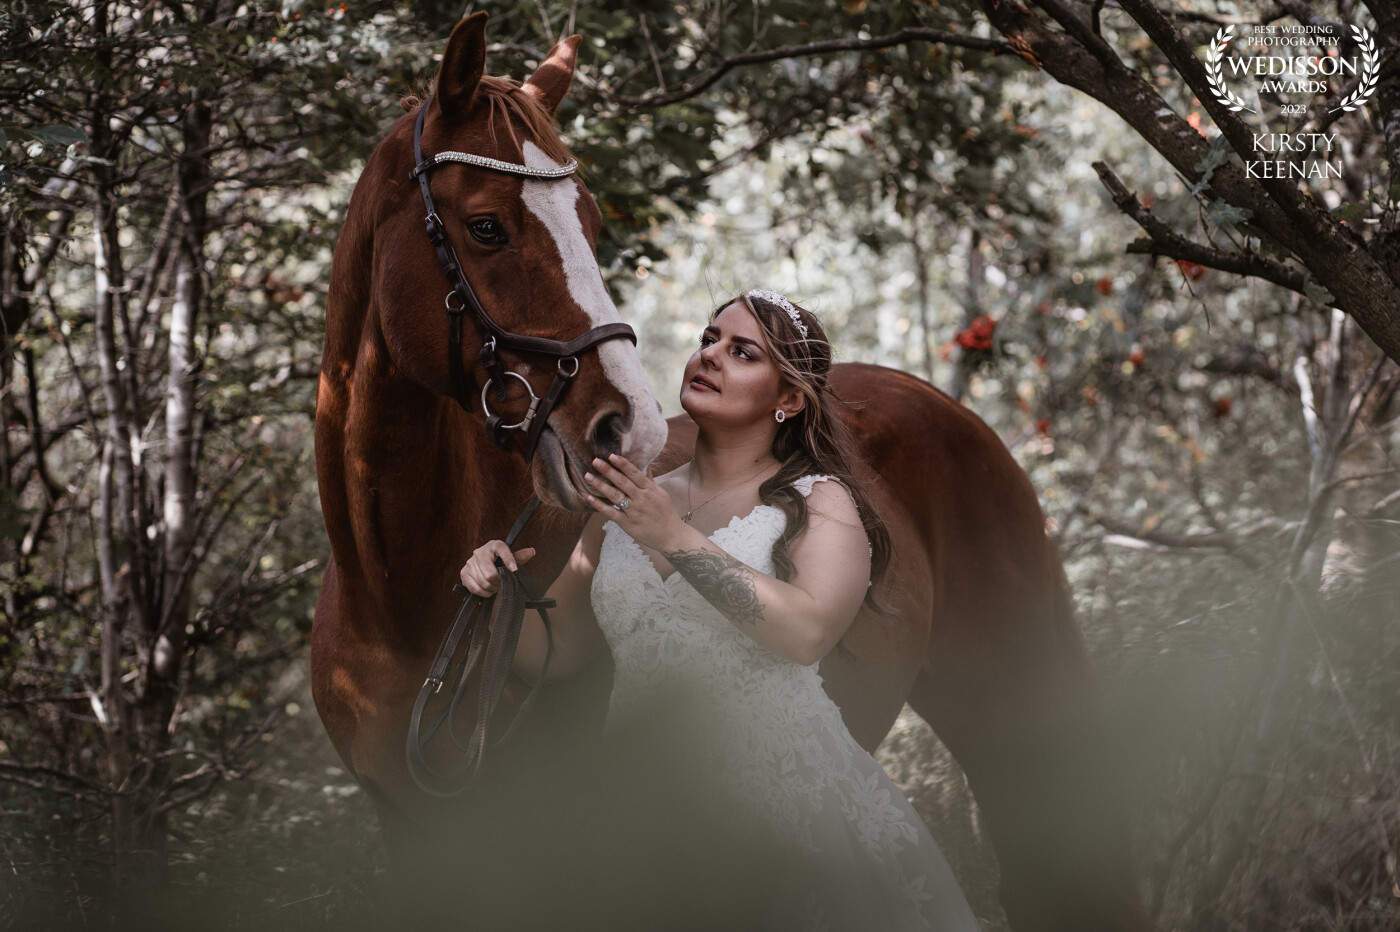 Late summer in Scotland,  where I was able to make a horsey girls dream come true and include her equine best friend in the wedding album.   The bride had such an amazing bond with her horse after years of partnership together. As a fellow horsey lass, I completely understood how much it means to have them there at that special time.